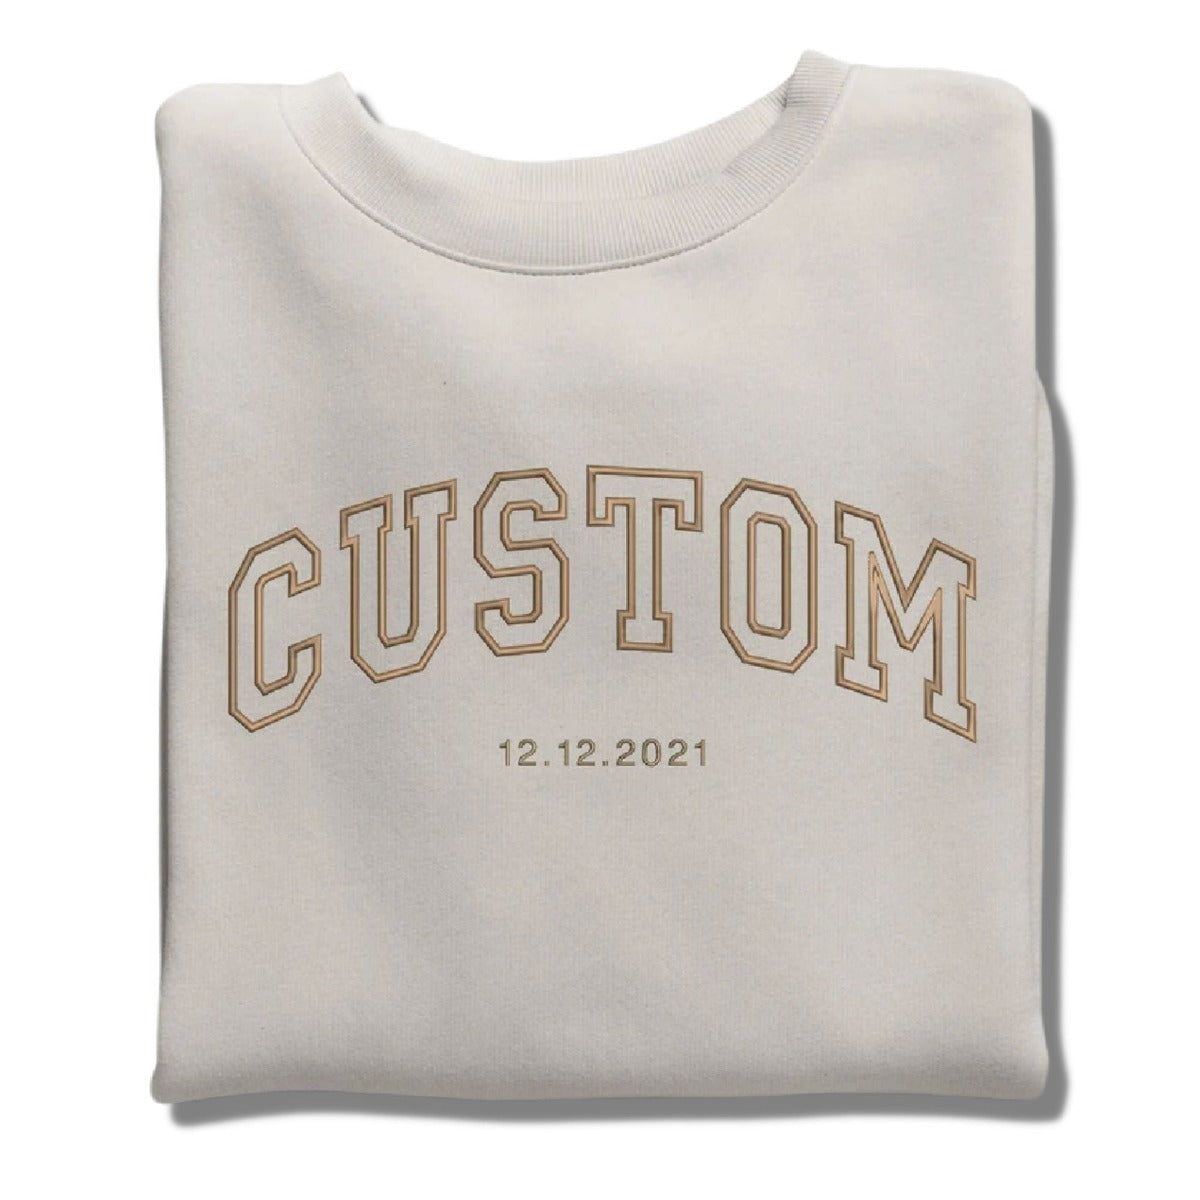 Custom Embroidered Sweatshirts, Hoodie - Personalized Gift for Men or Women